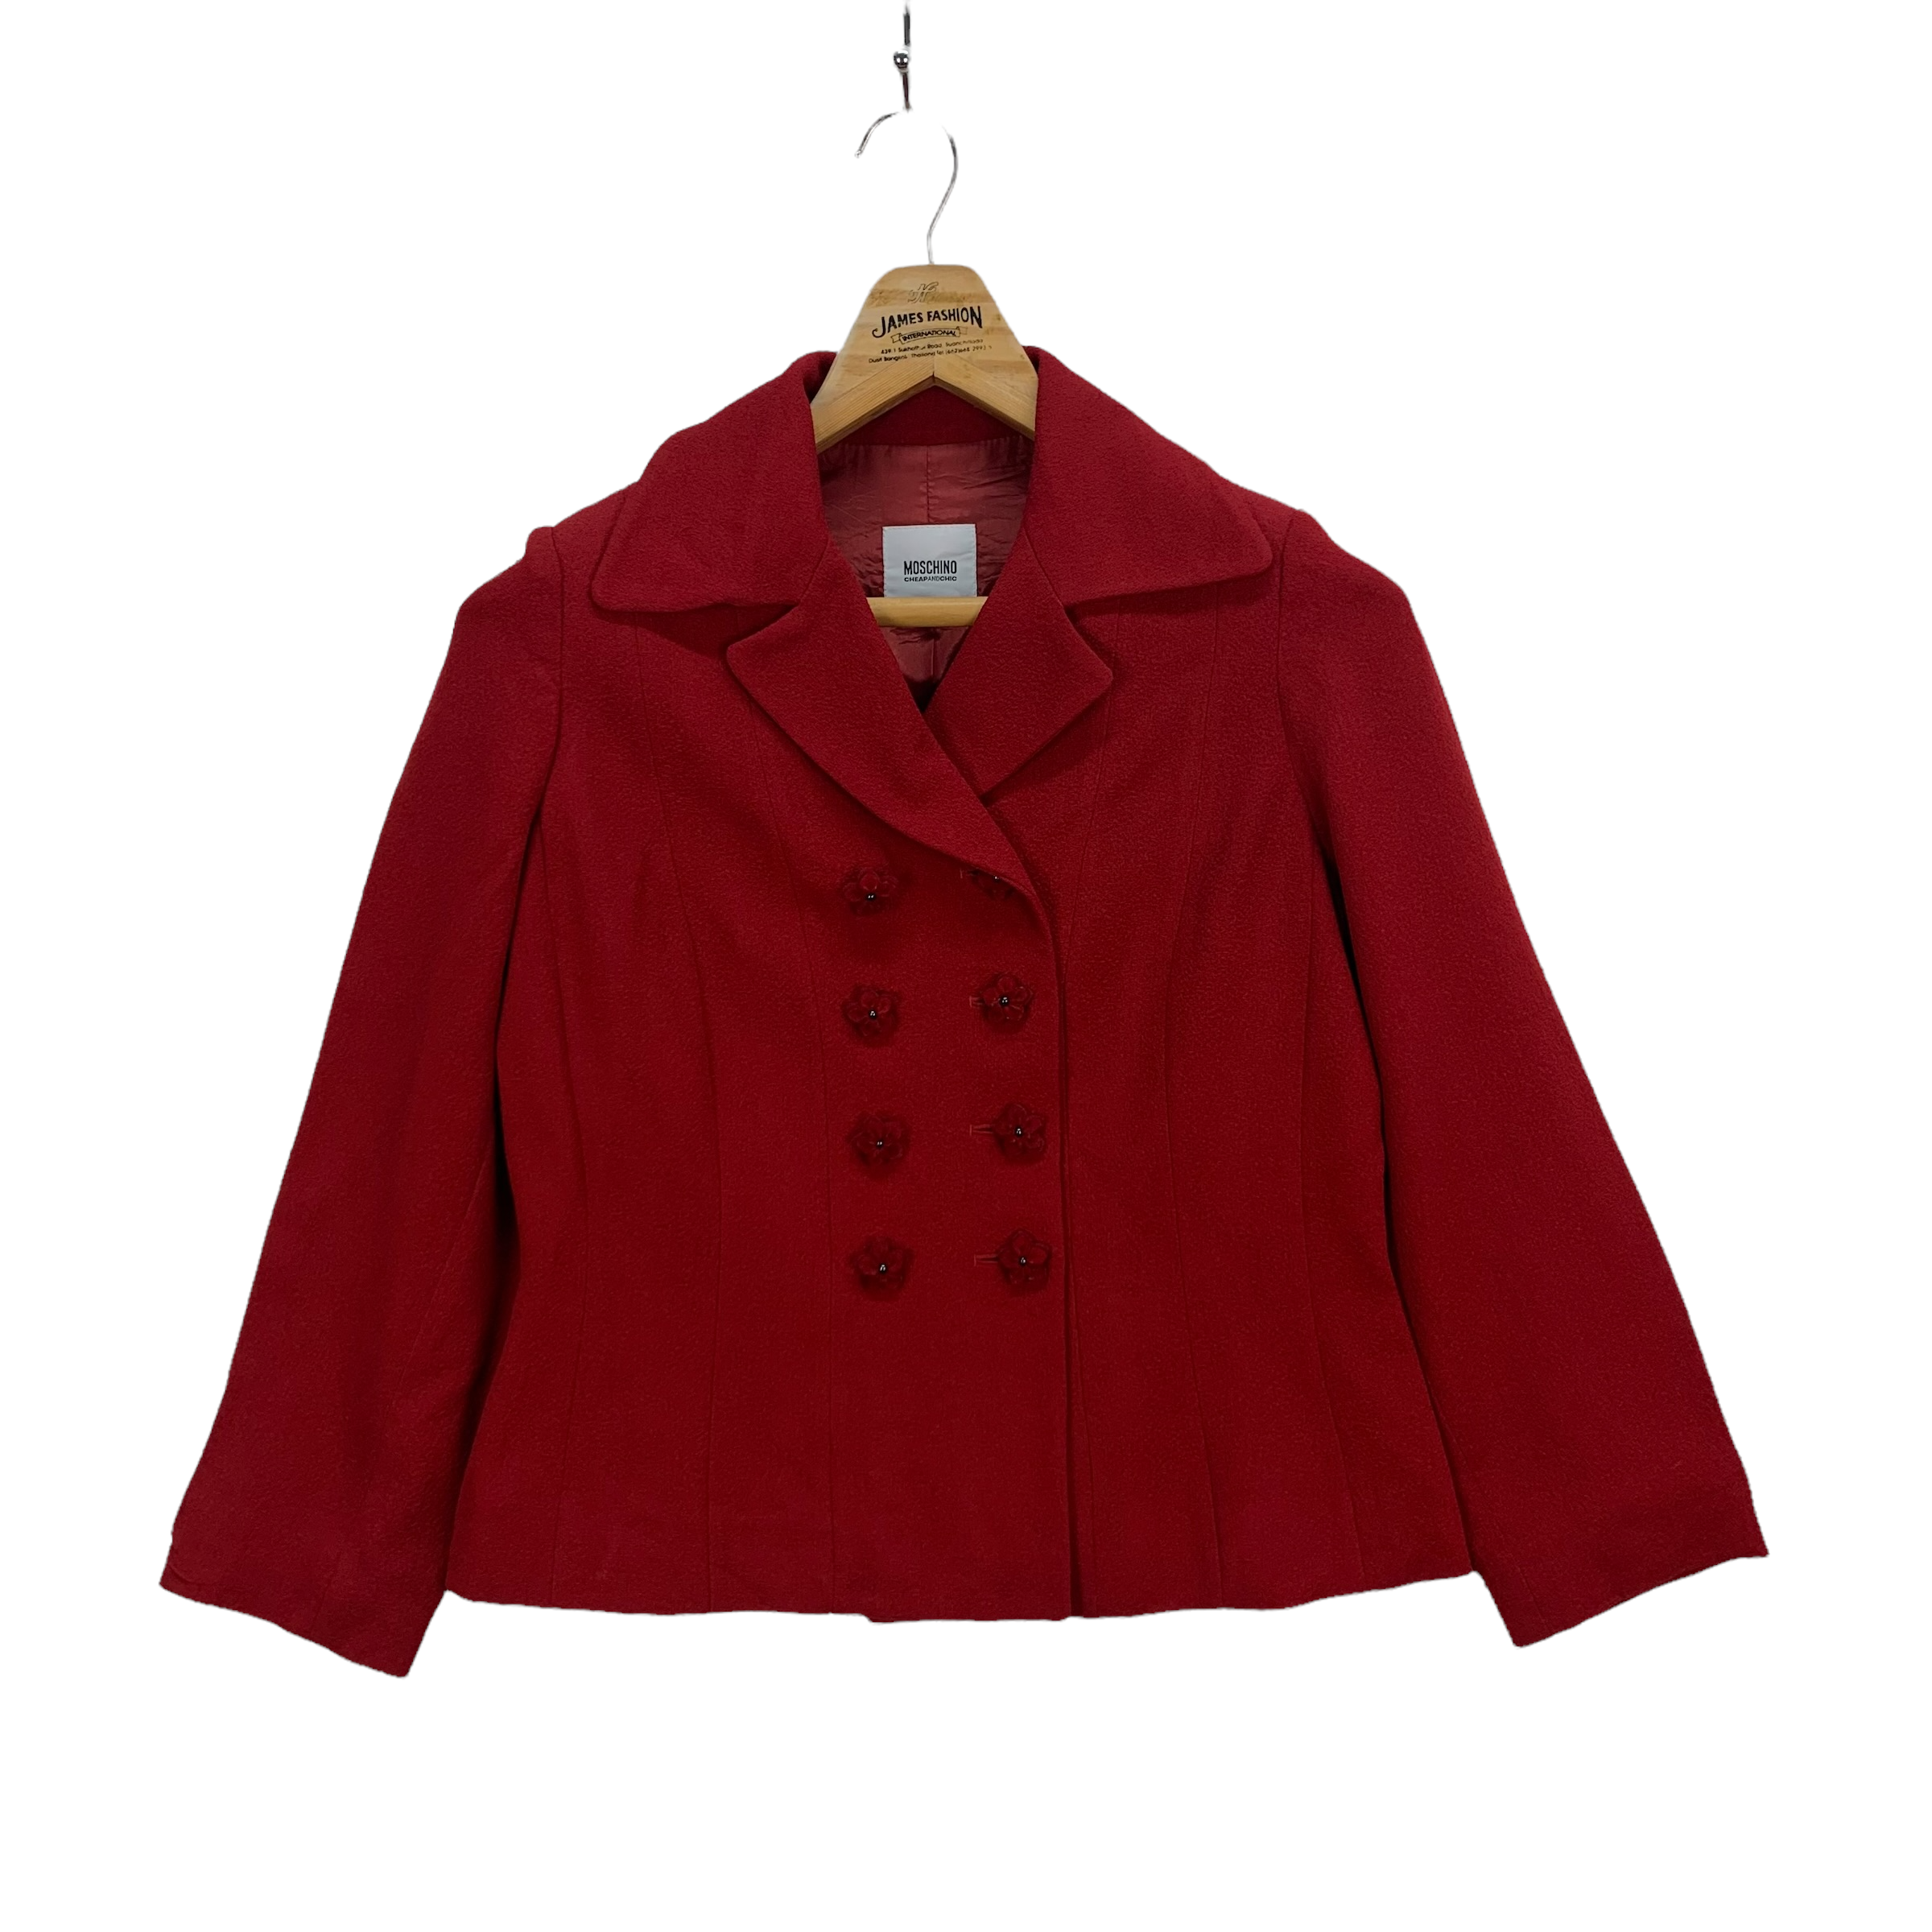 Moschino Cheap and Chic Red Double Breasted Coat #3952-137 - 1